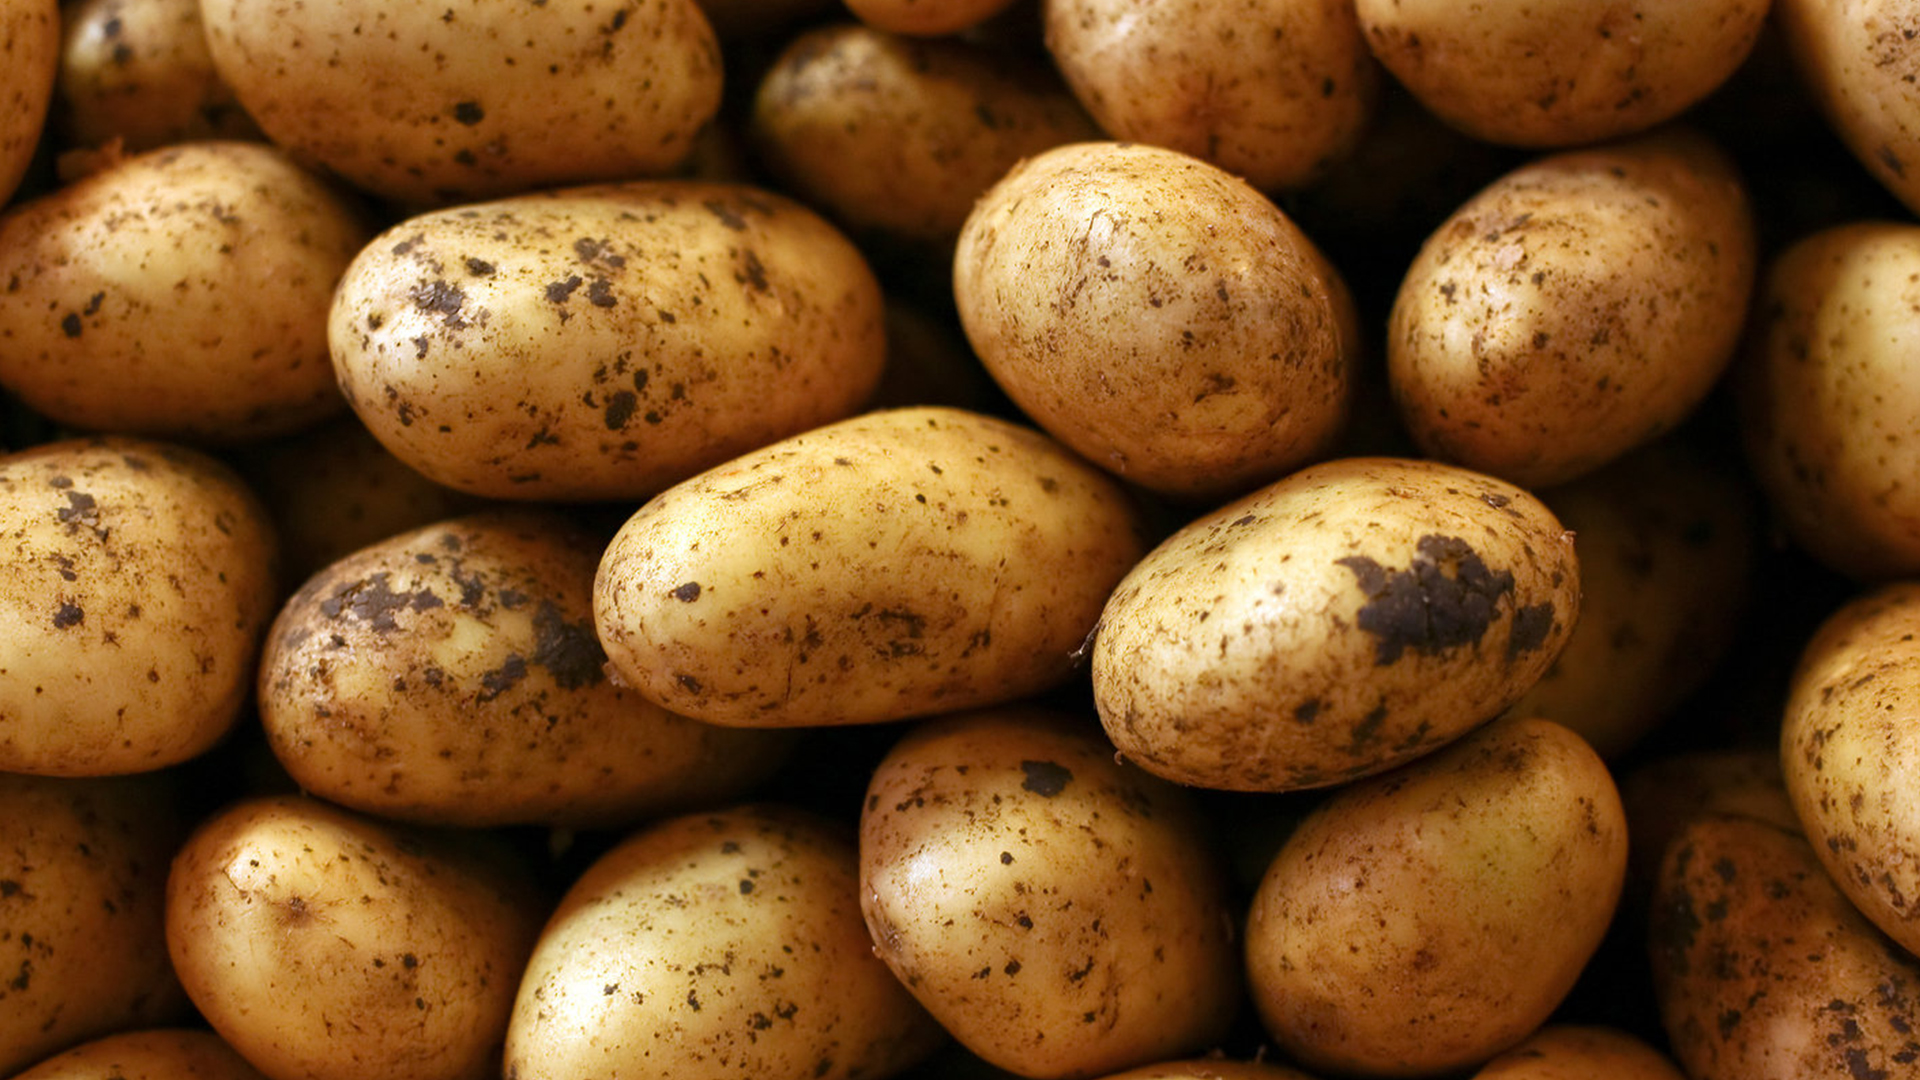 Tajik farmers receive 60 tons of high-quality elite seed potatoes from the FAO and the European Union